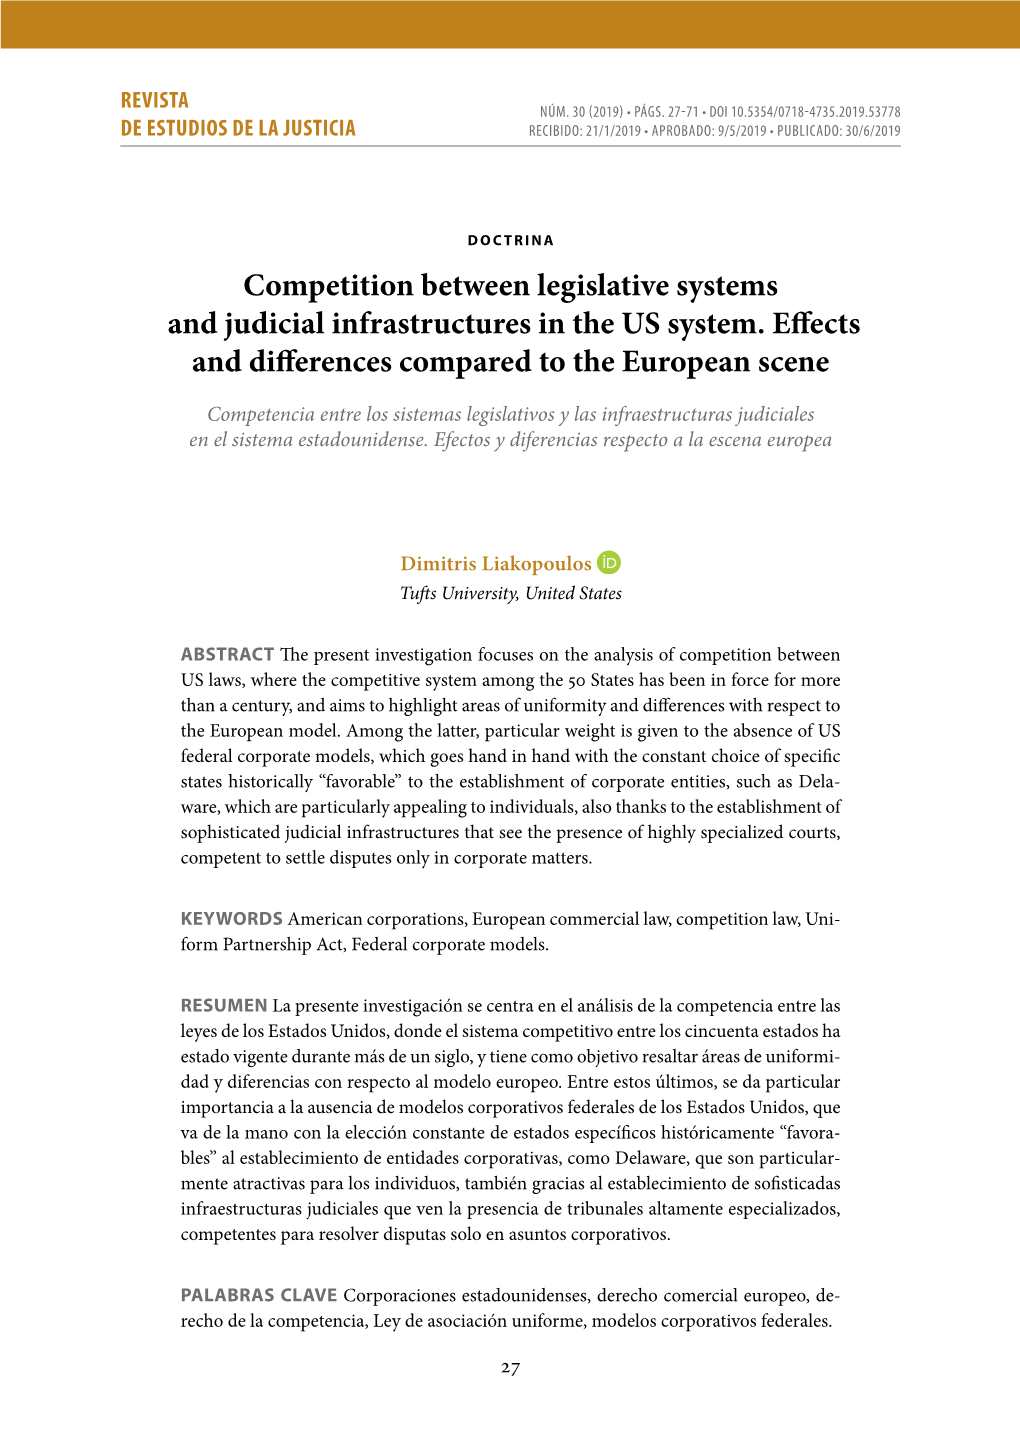 Competition Between Legislative Systems and Judicial Infrastructures in the US System